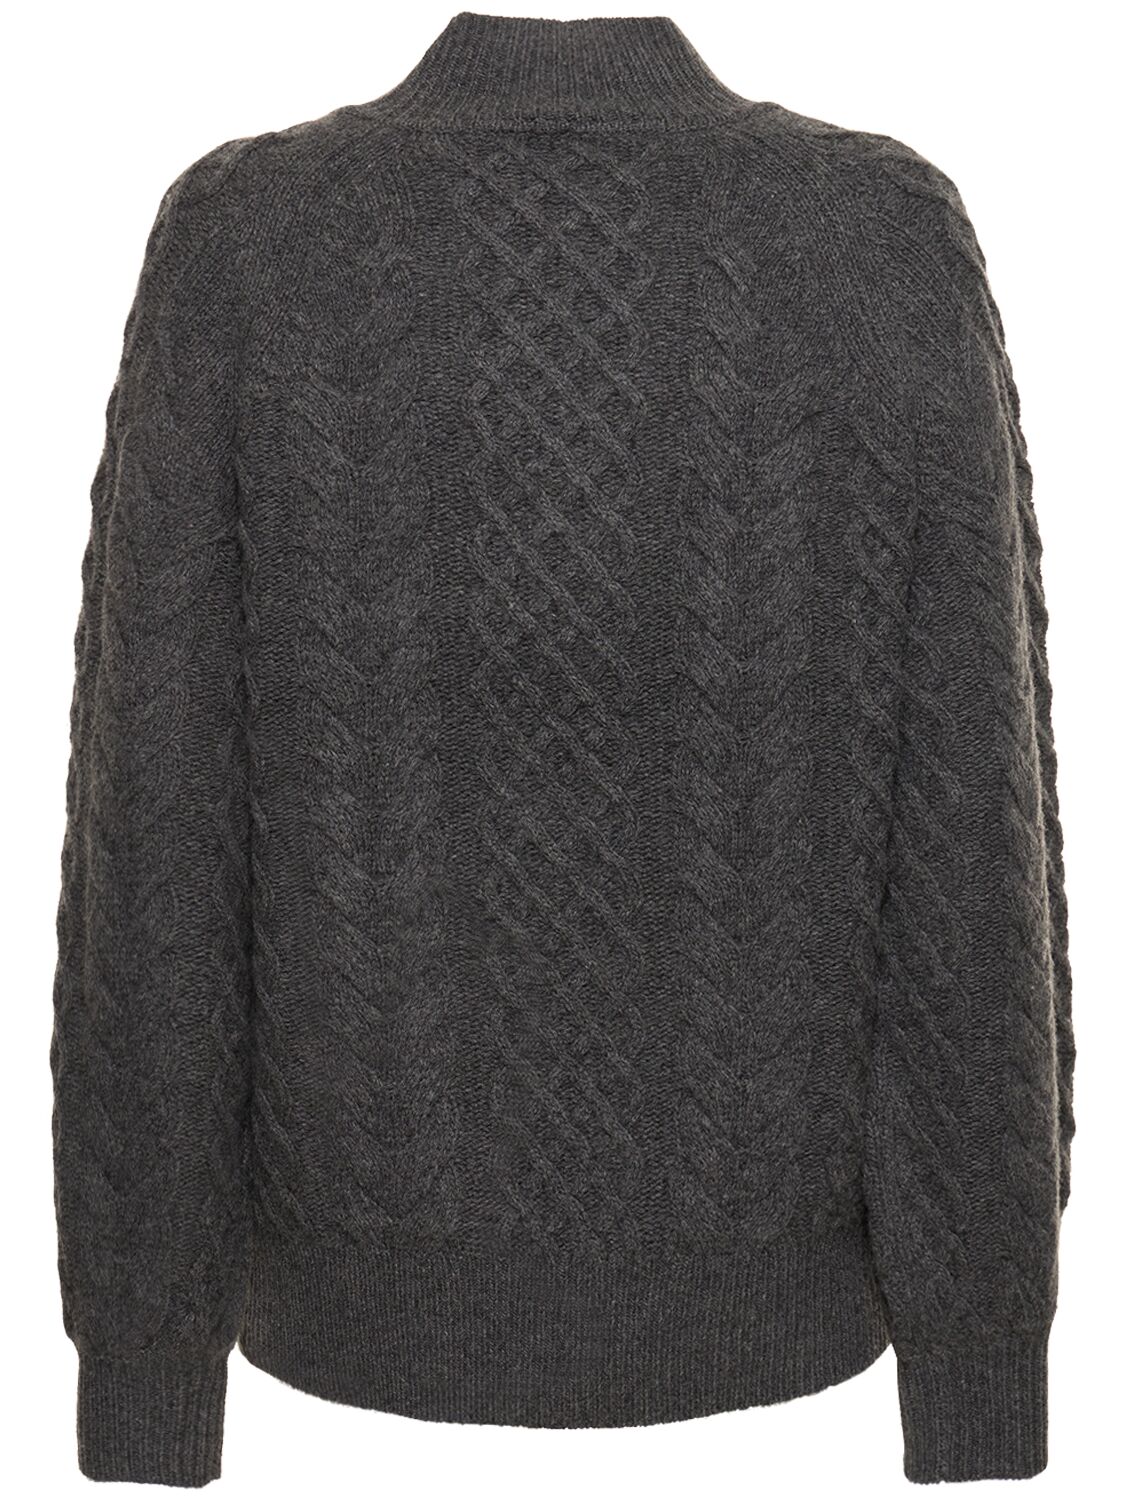 Shop The Garment Como Wool Blend Cable Knit Sweater In Heather Grey